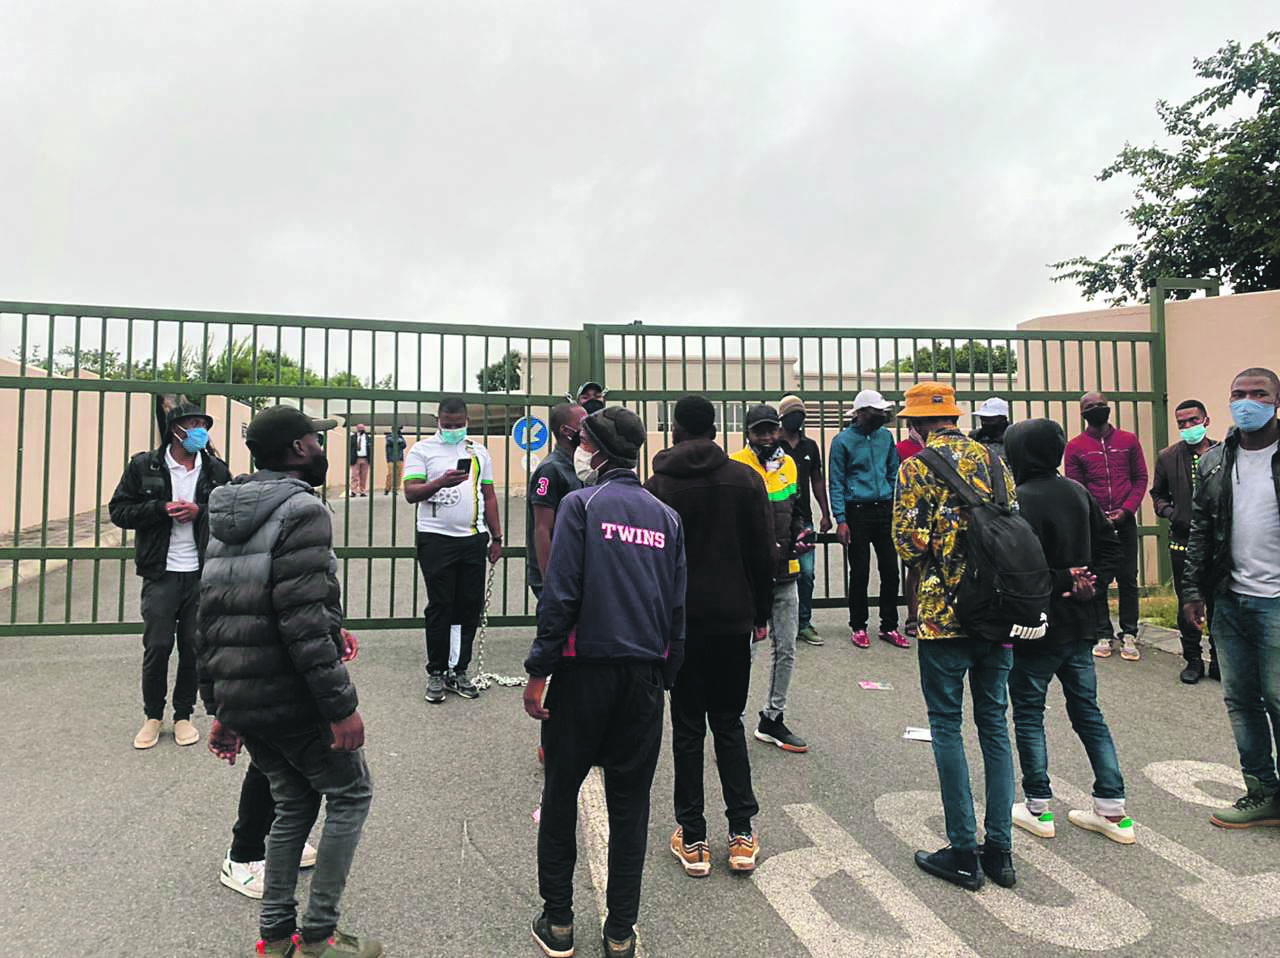 Cosas members protested outside Charterhouse yesterday after claims that the school was operating despite the lockdown regulations.